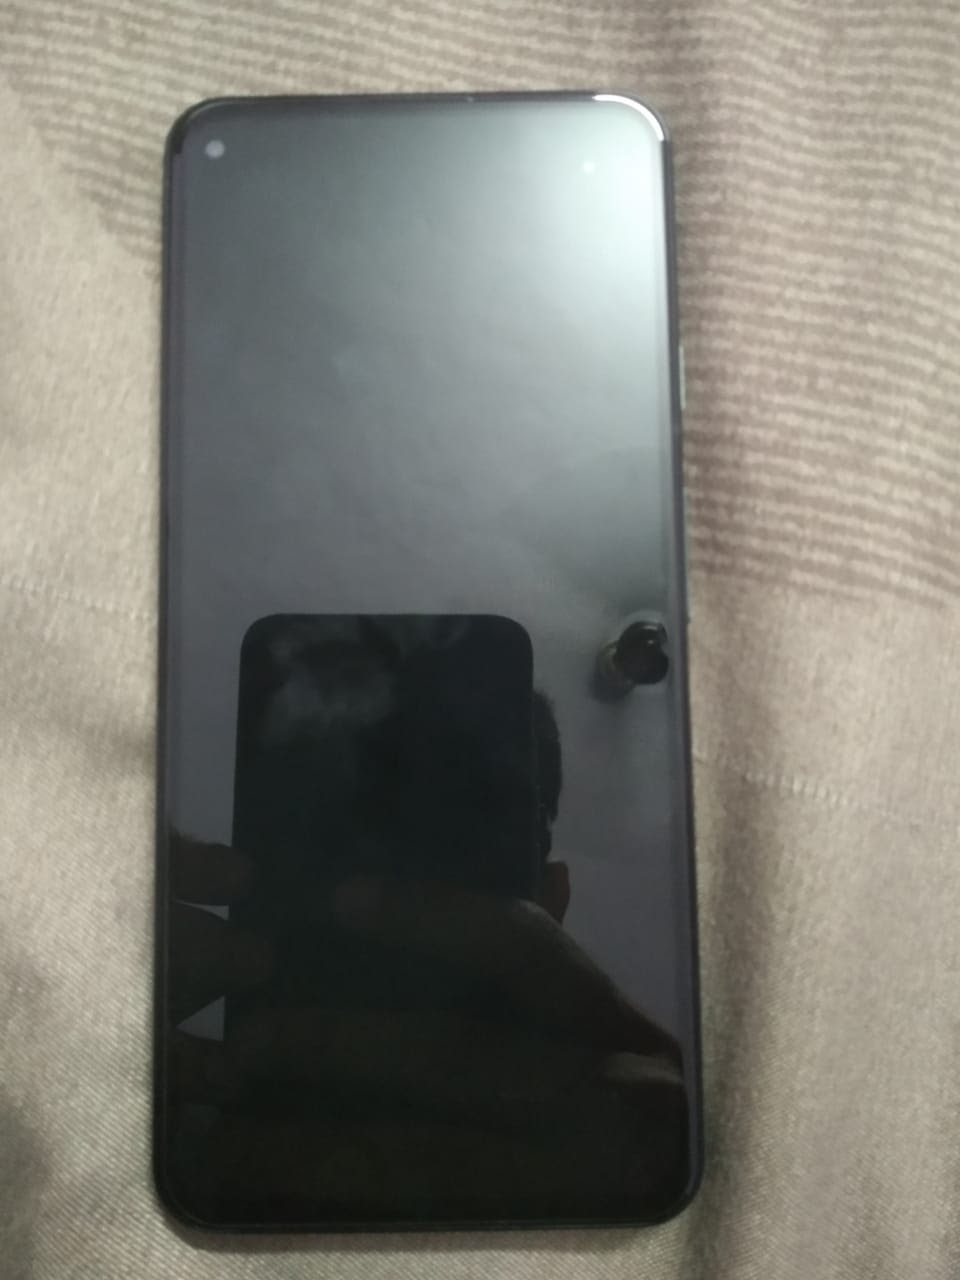 My Google phone 5A 5G Display is not working. Black screen flickering and  nothing is visible - Google Pixel Community